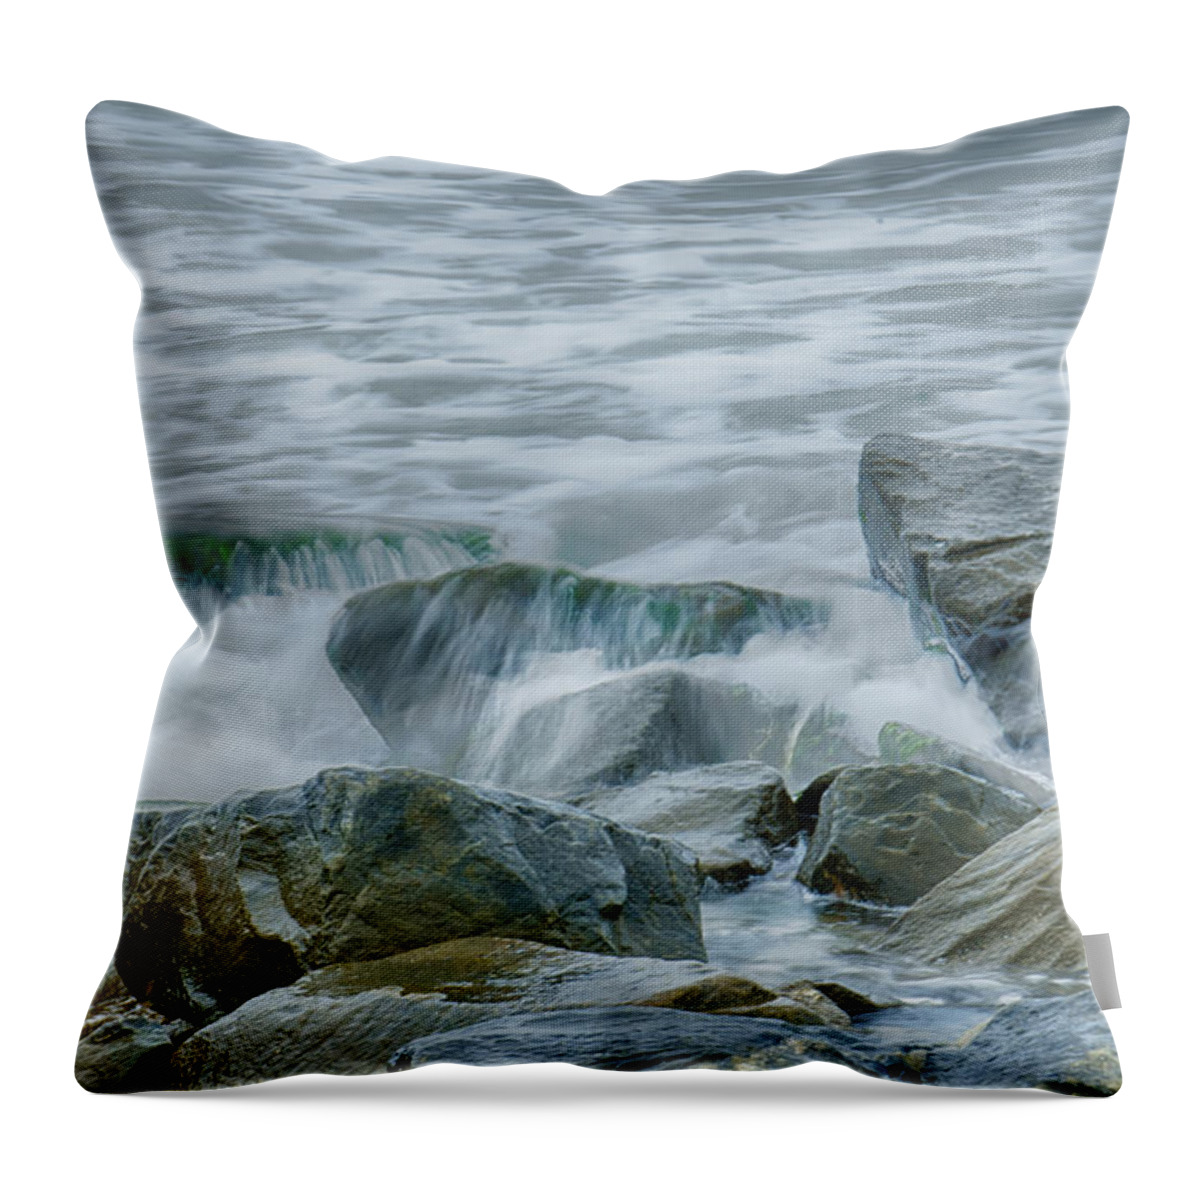 Attack Throw Pillow featuring the photograph Seascape With Waves And Sand Beach #4 by Alex Grichenko